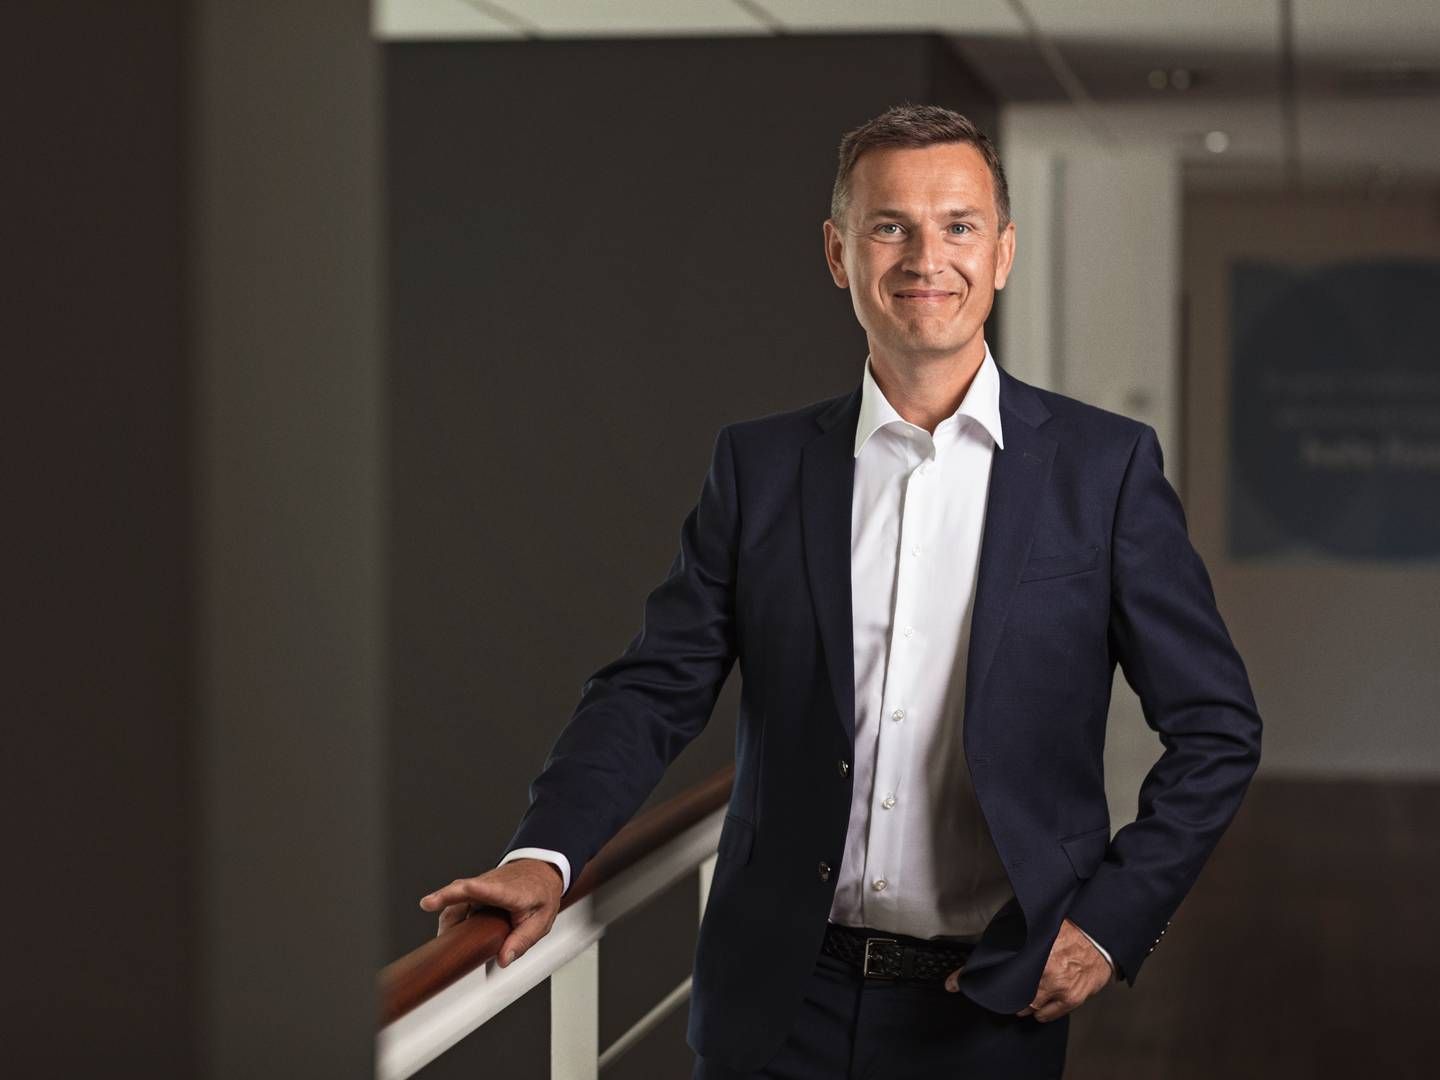 According to CFO of AkademikerPension Anders Achelde, Danske Bank faces a monumental task if the bank's new strategy is to succeed. | Photo: PR/AkademikerPension